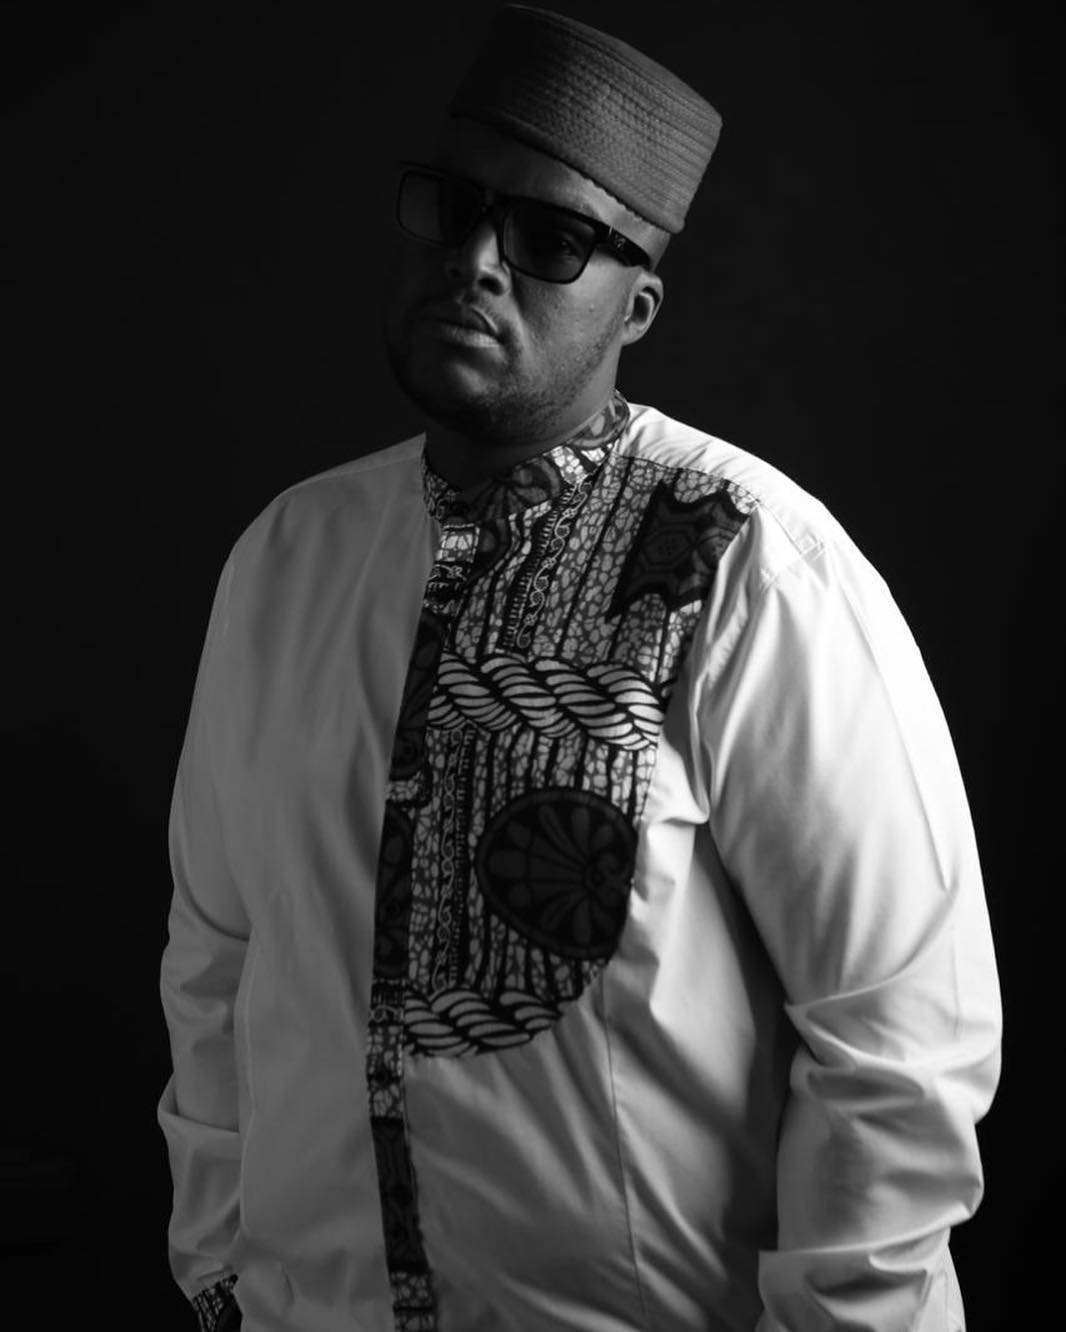 South Africa Mourns For The Loss Of Its Hip Hop Legend, HHP